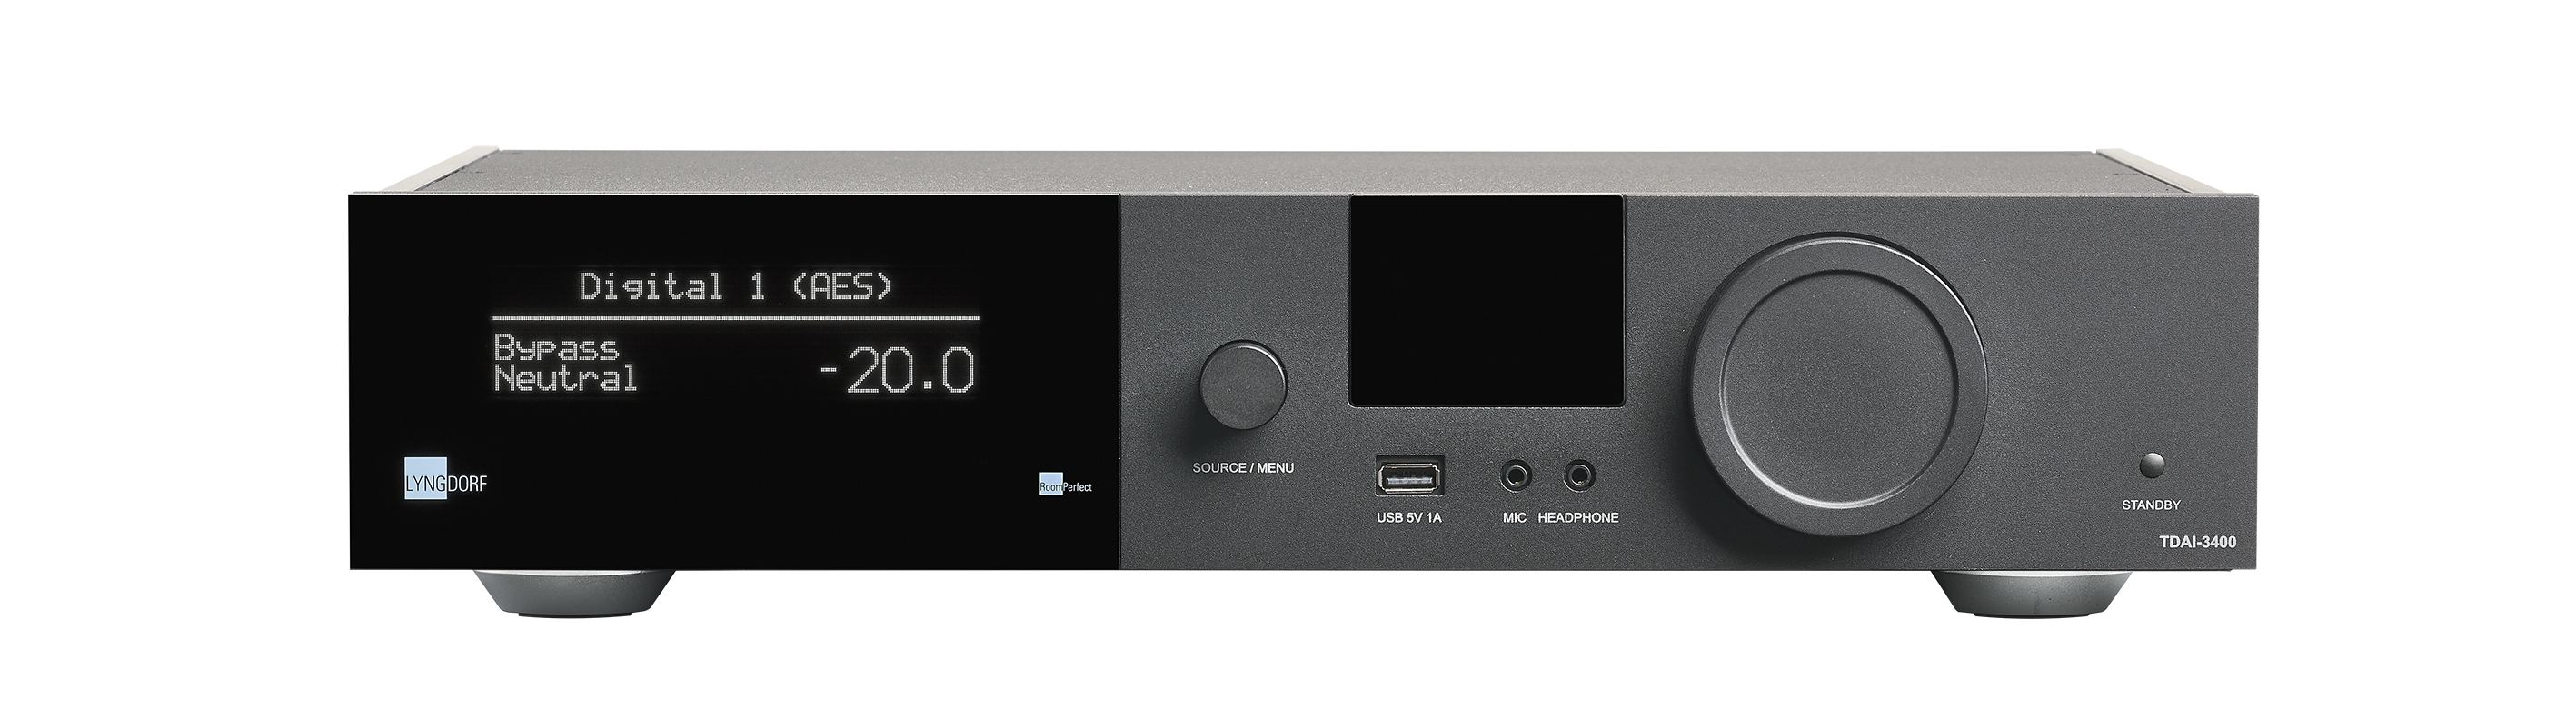 Lyngdorf TDAI-3400 Integrated Amplifier with Room Correction